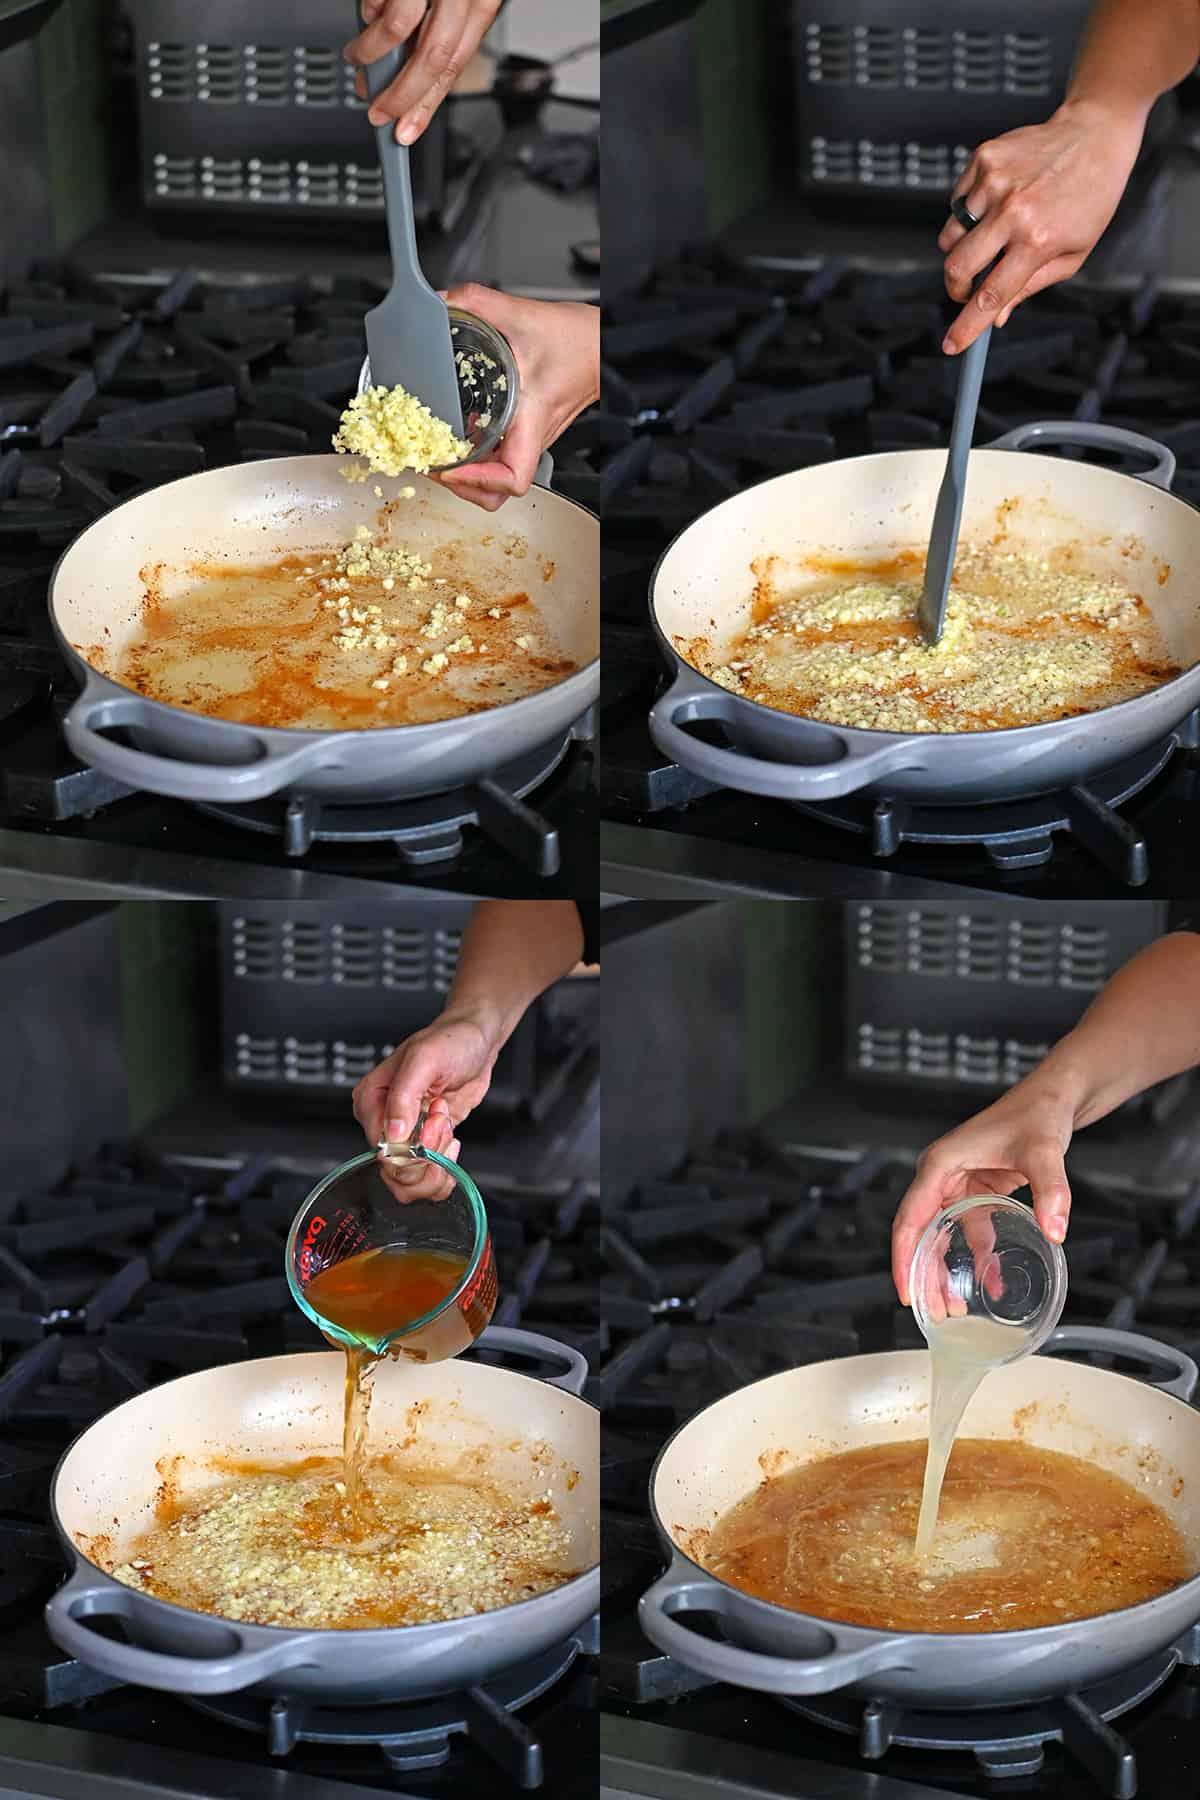 Four sequential shots that show someone making the lemon garlic chicken sauce in a pan by adding minced garlic, broth, and lemon juice.